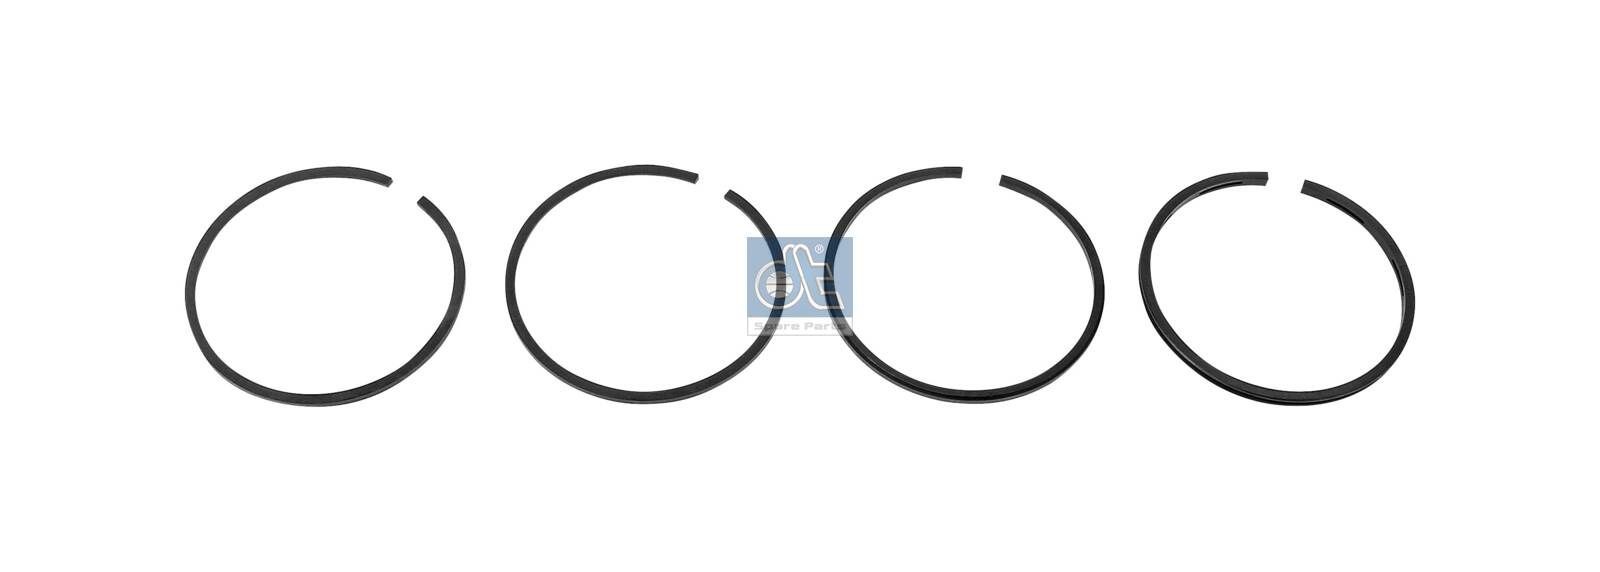 800016711000 DT Spare Parts 77mm Piston Ring Set 4.92039 buy